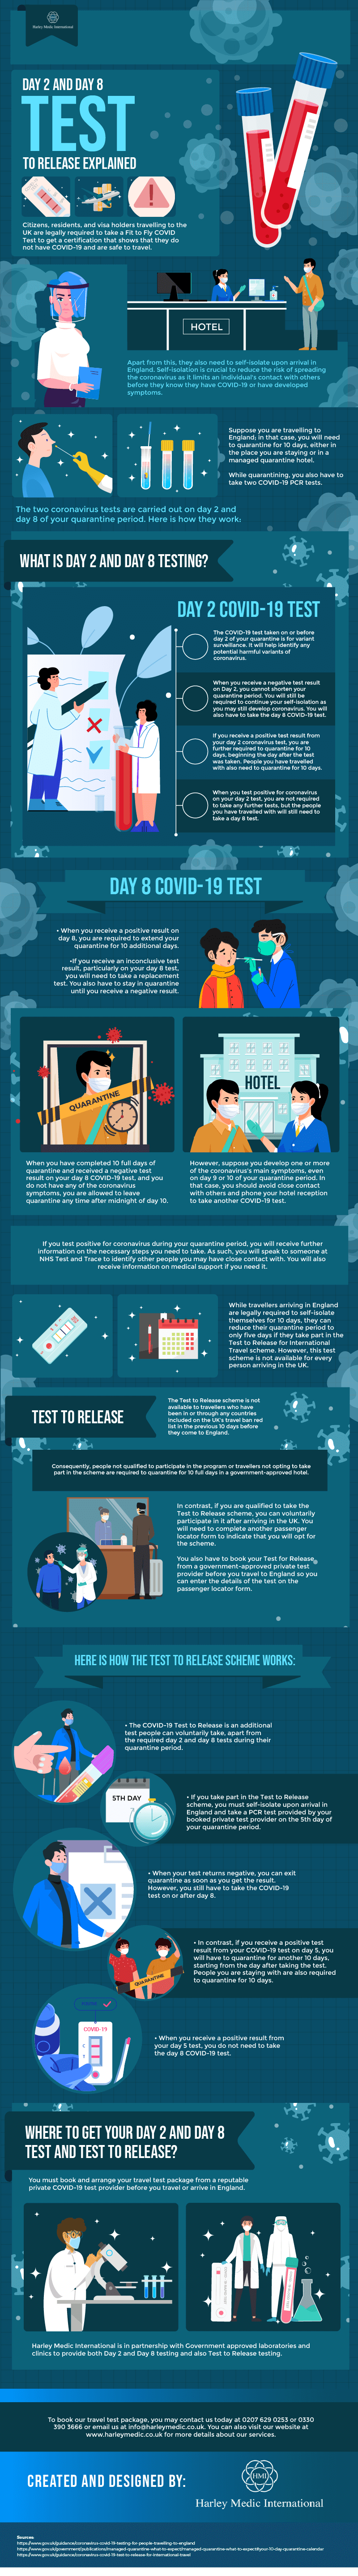 Day-2-and-Day-8-Test-to-Release-Explained